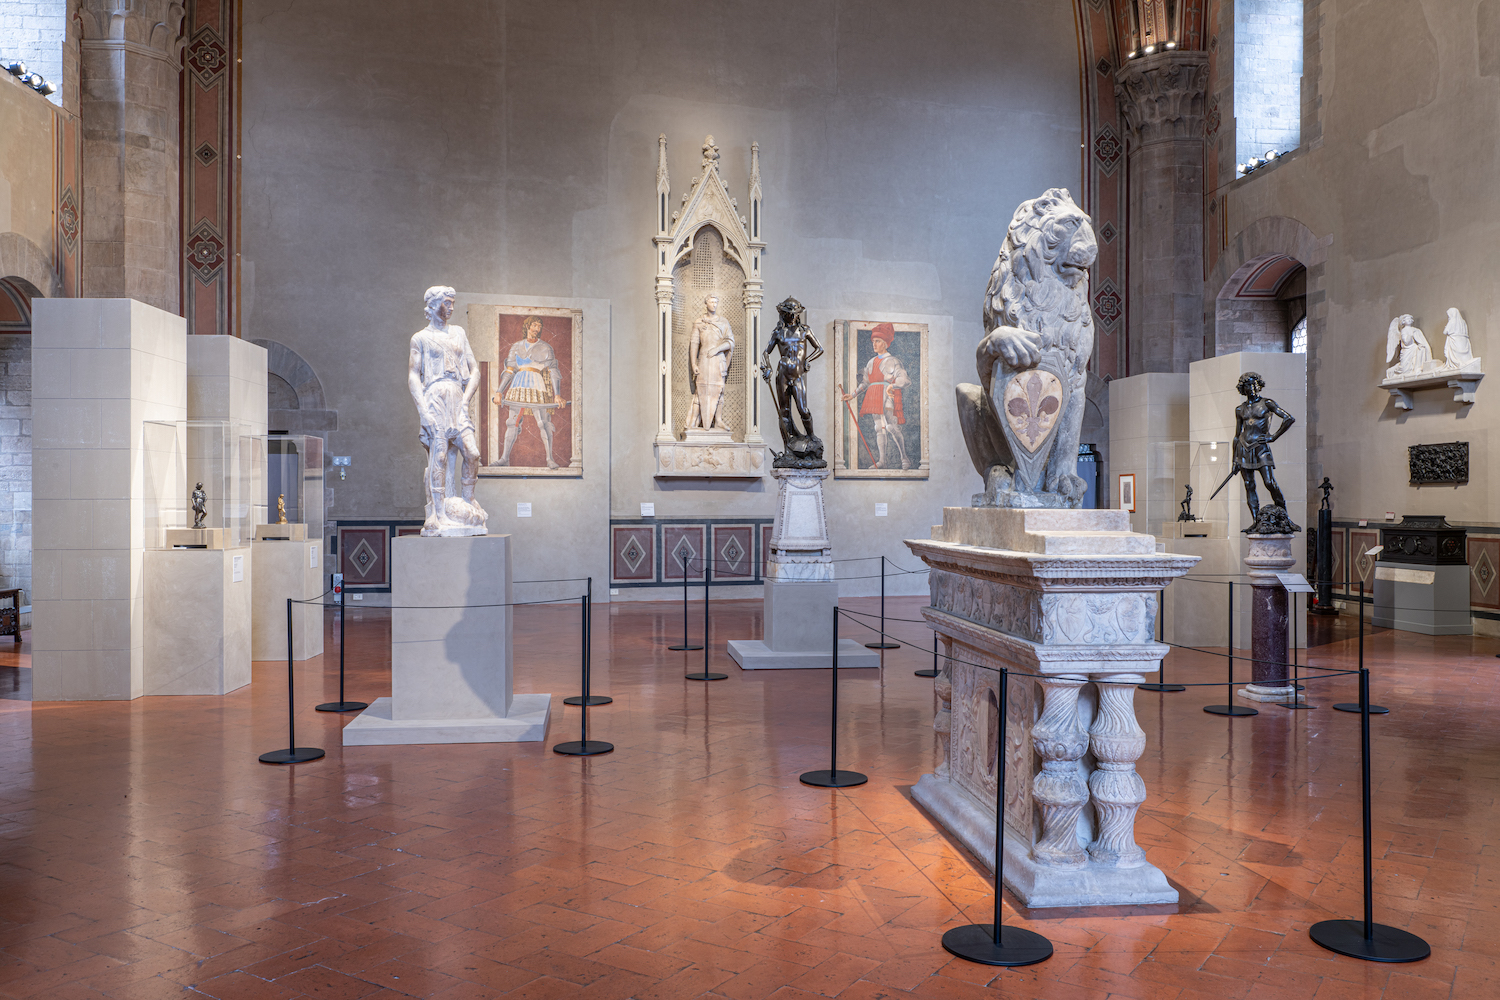 In Pictures: A Once-In-a-Lifetime Donatello Exhibition Surveys the  Renaissance Master's Revolutionary Sculptural Practice